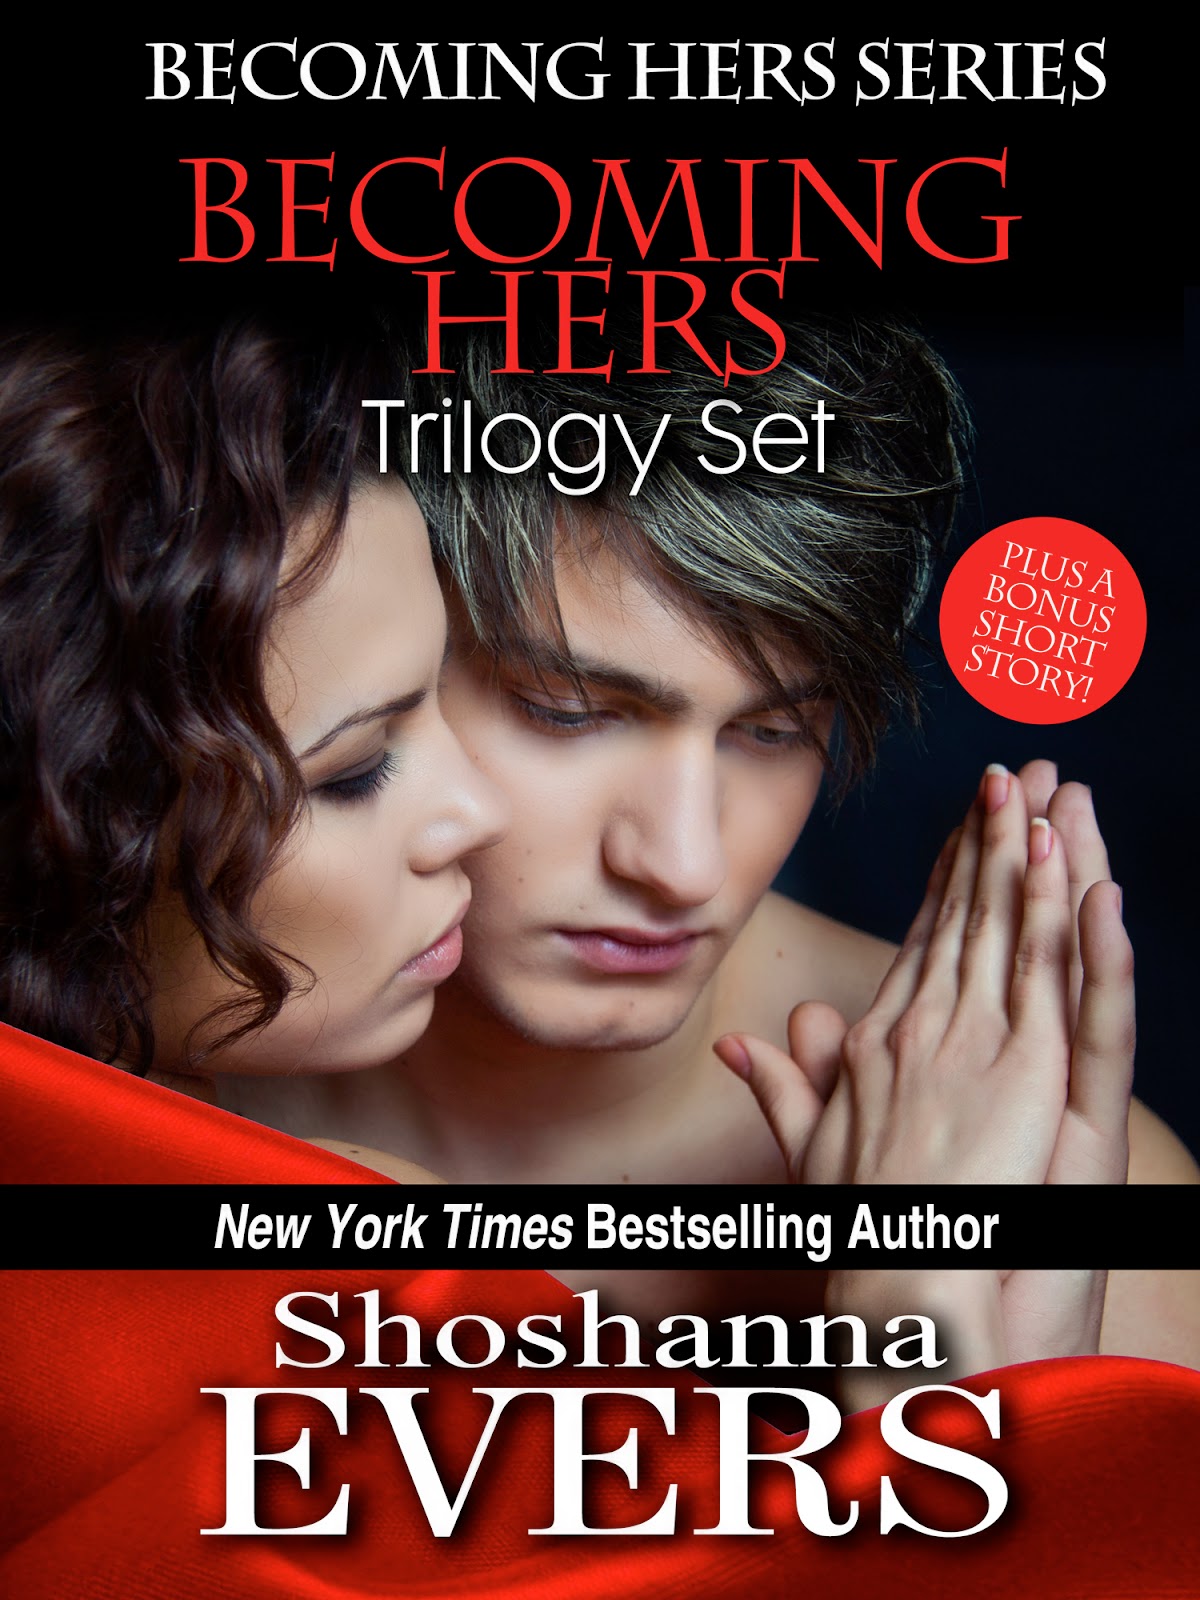 Becoming Hers Trilogy Set by Shoshanna Evers